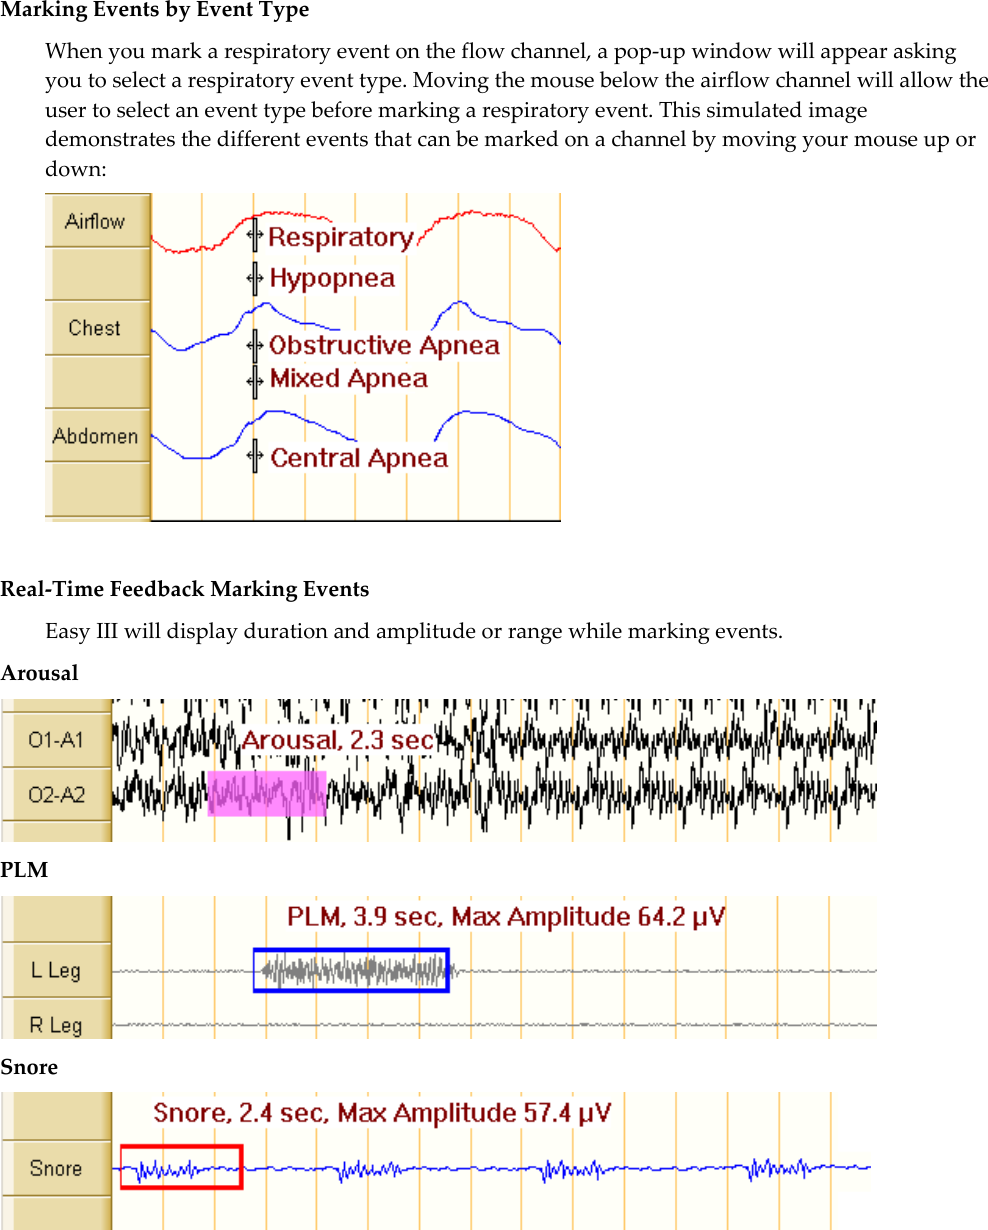   Marking Events by Event Type When you mark a respiratory event on the flow channel, a pop-up window will appear asking you to select a respiratory event type. Moving the mouse below the airflow channel will allow the user to select an event type before marking a respiratory event. This simulated image demonstrates the different events that can be marked on a channel by moving your mouse up or down:   Real-Time Feedback Marking Events Easy III will display duration and amplitude or range while marking events. Arousal  PLM  Snore   